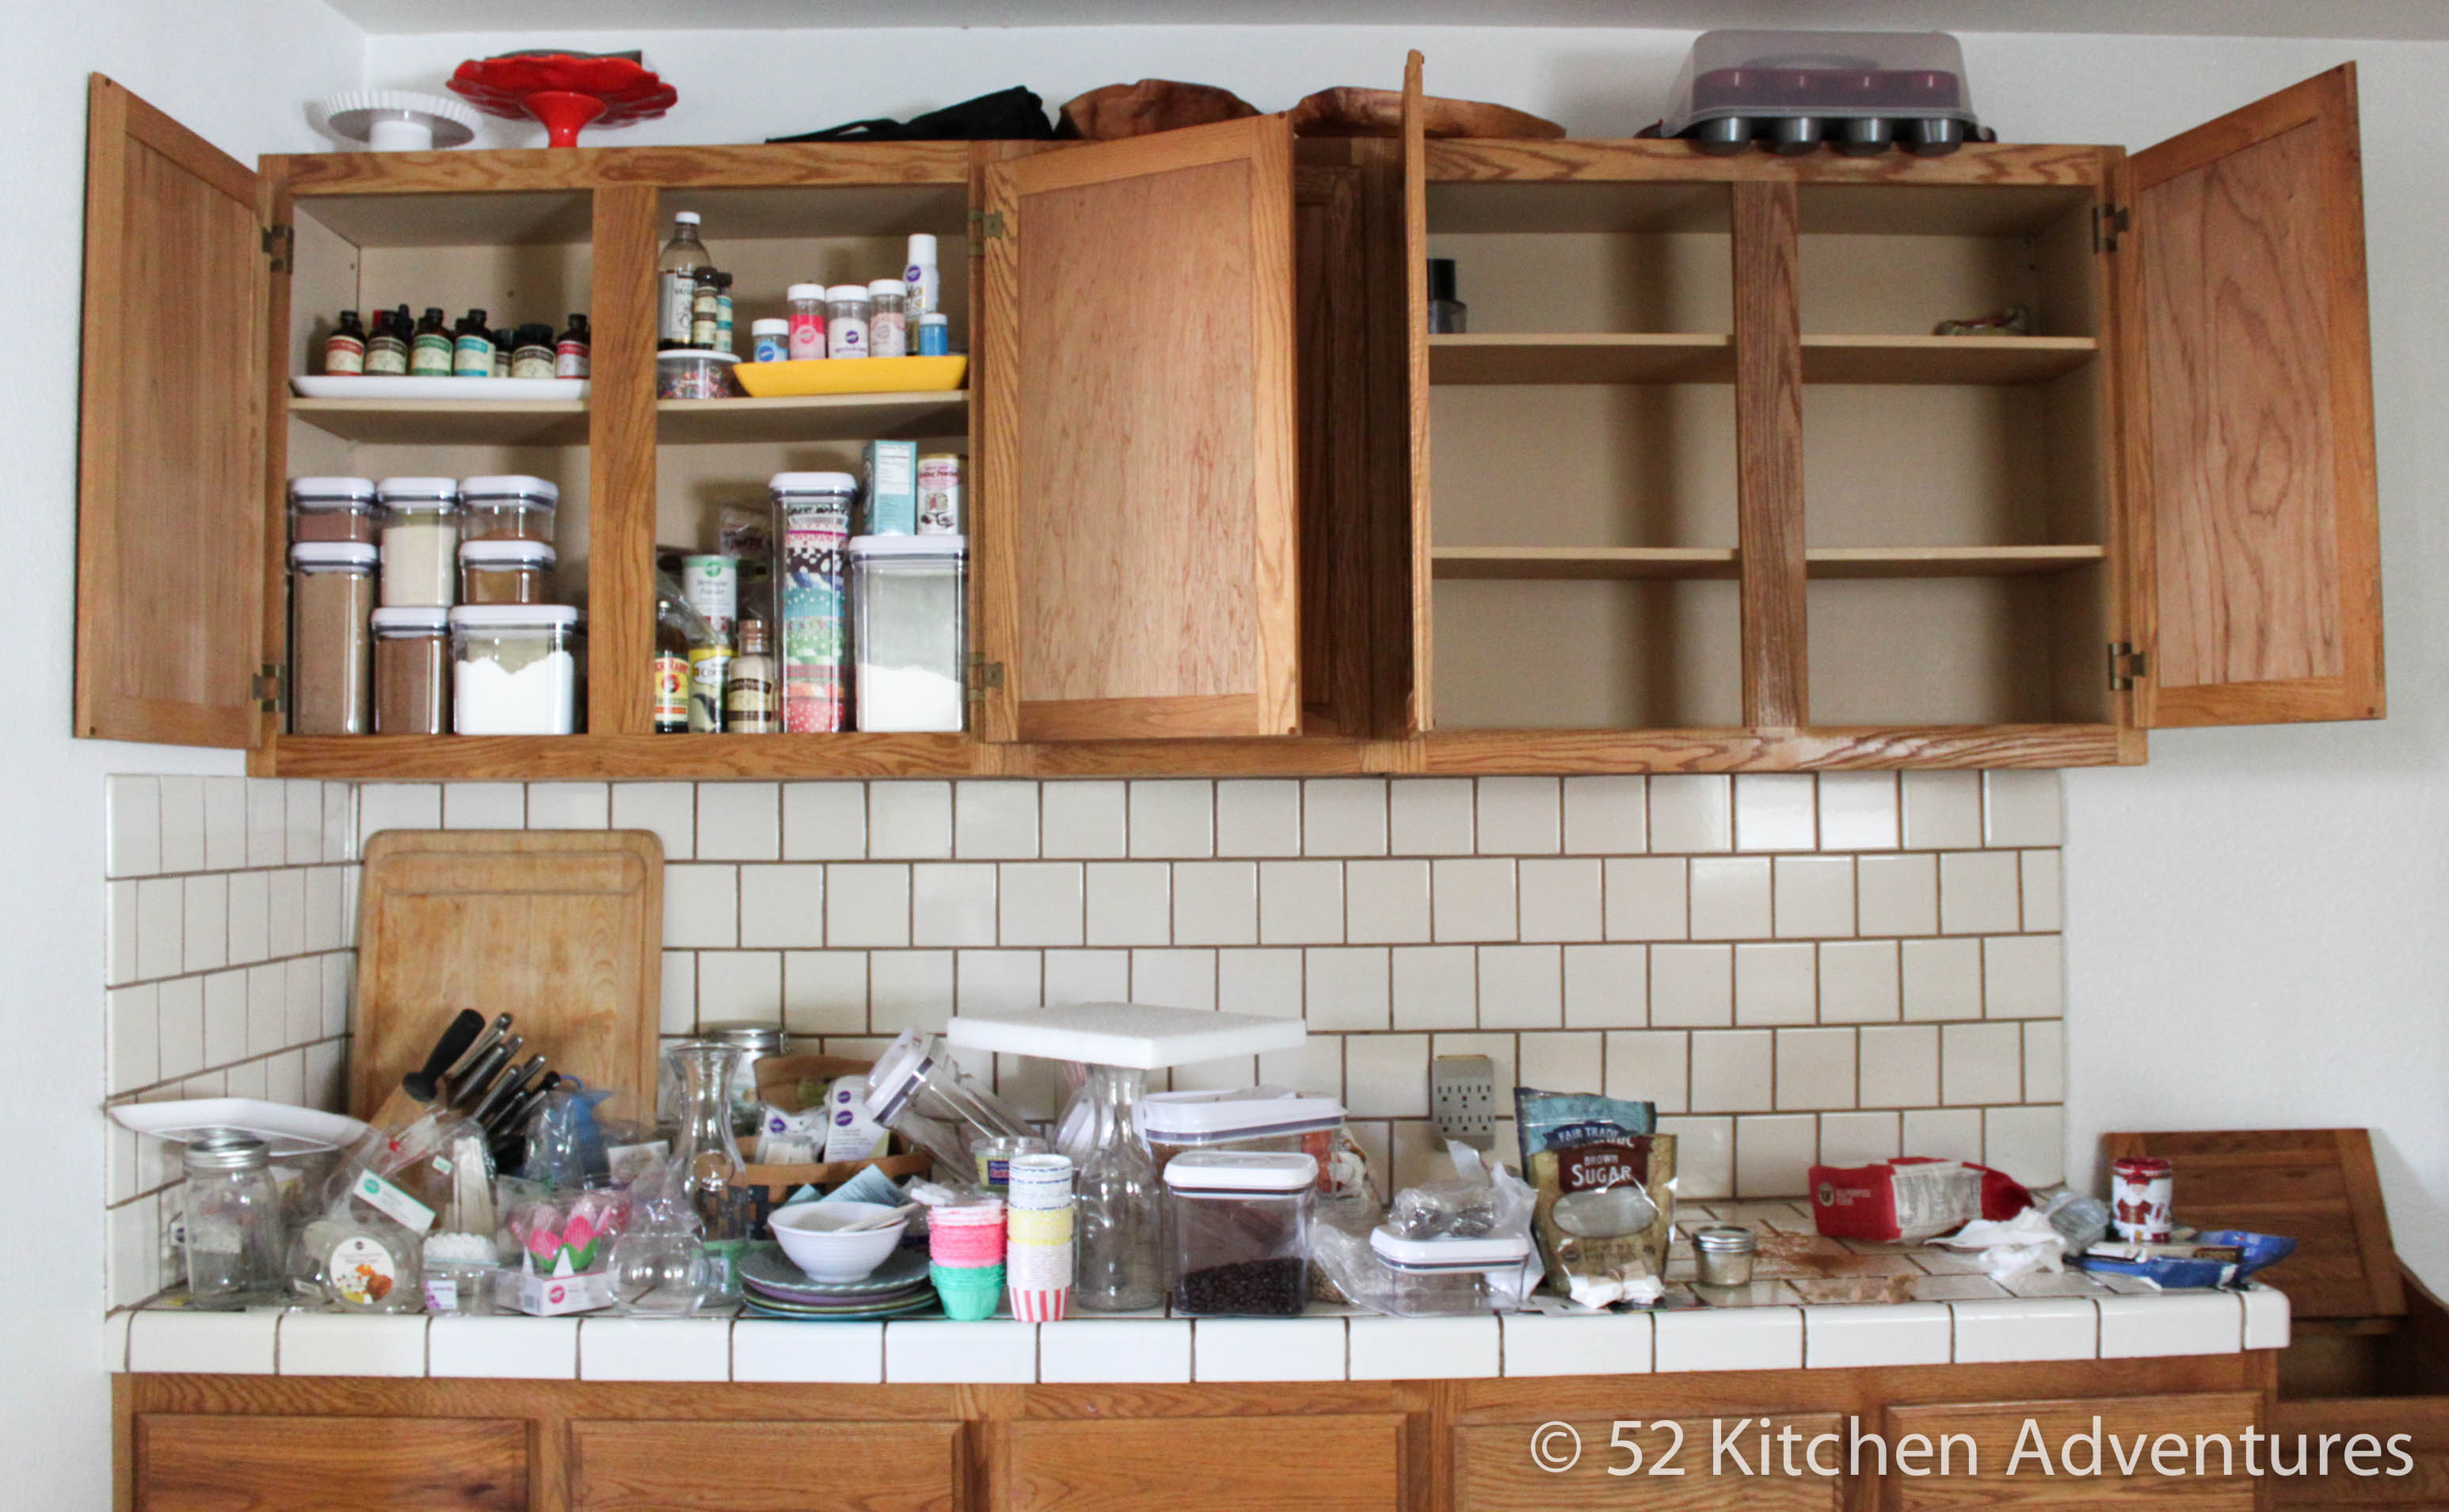 Top 13 Tips for Organizing Baking Supplies